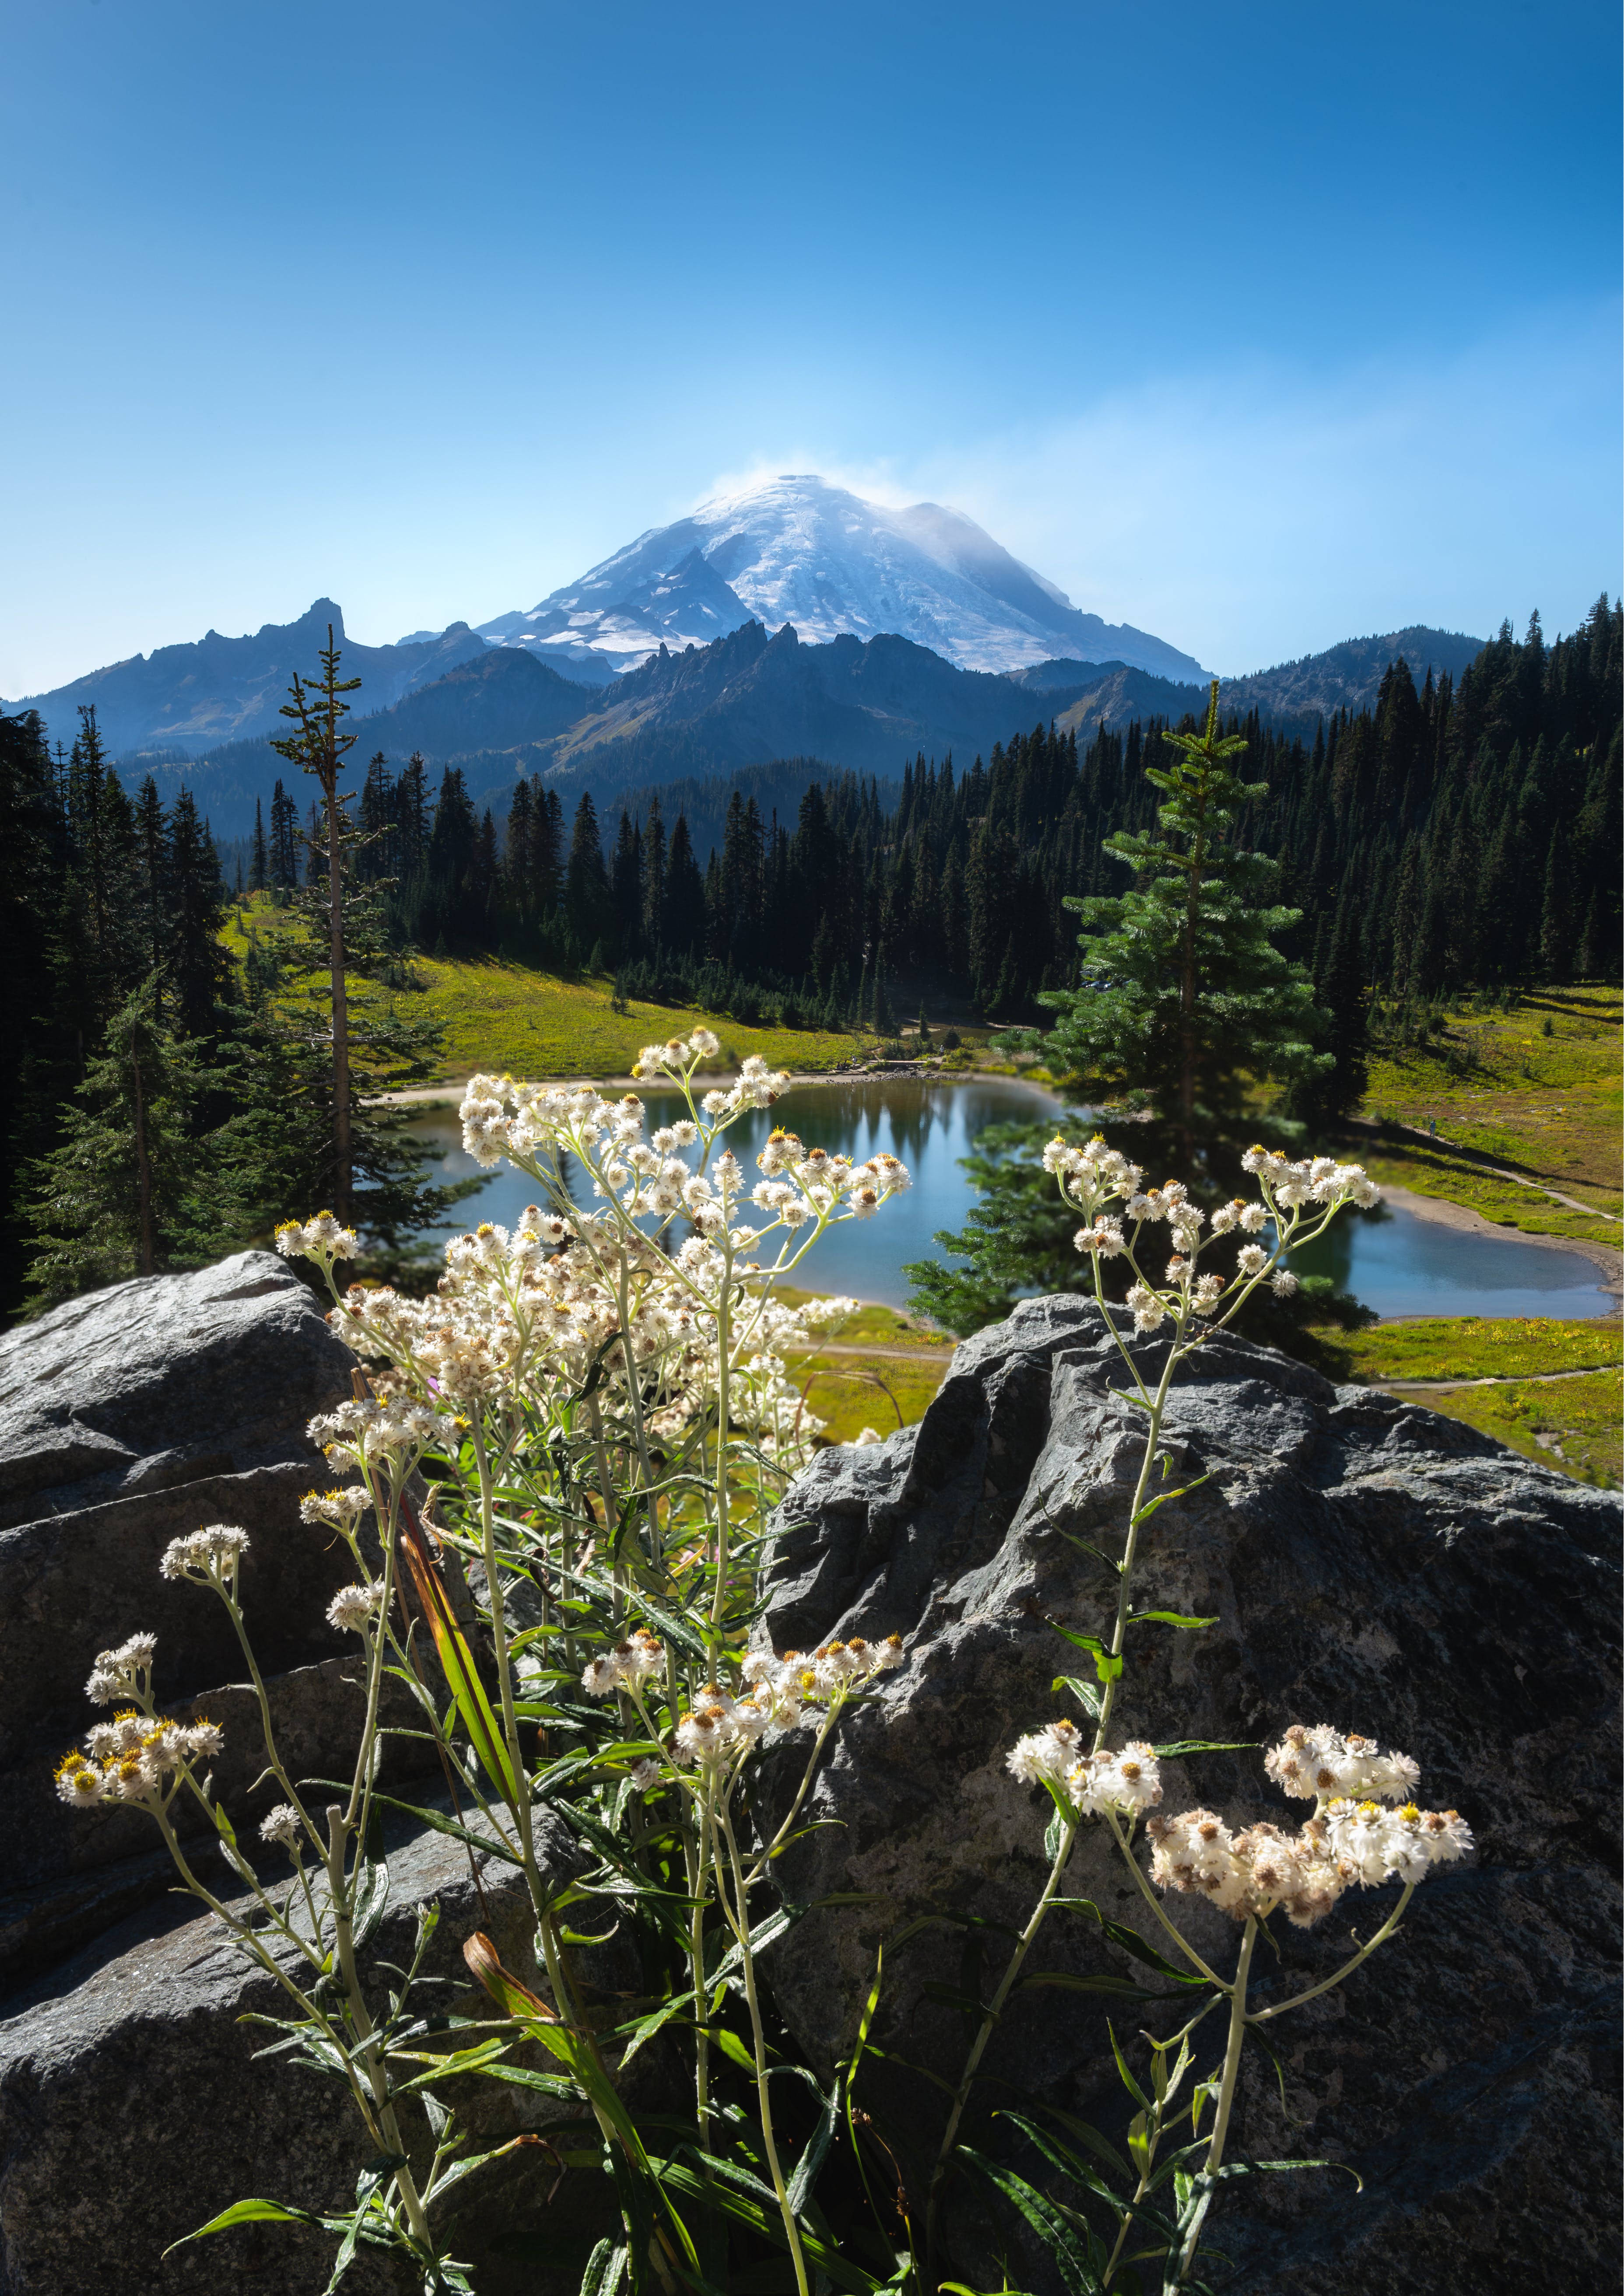 The breathtaking natural scenery in Washington State | Source: Pexels